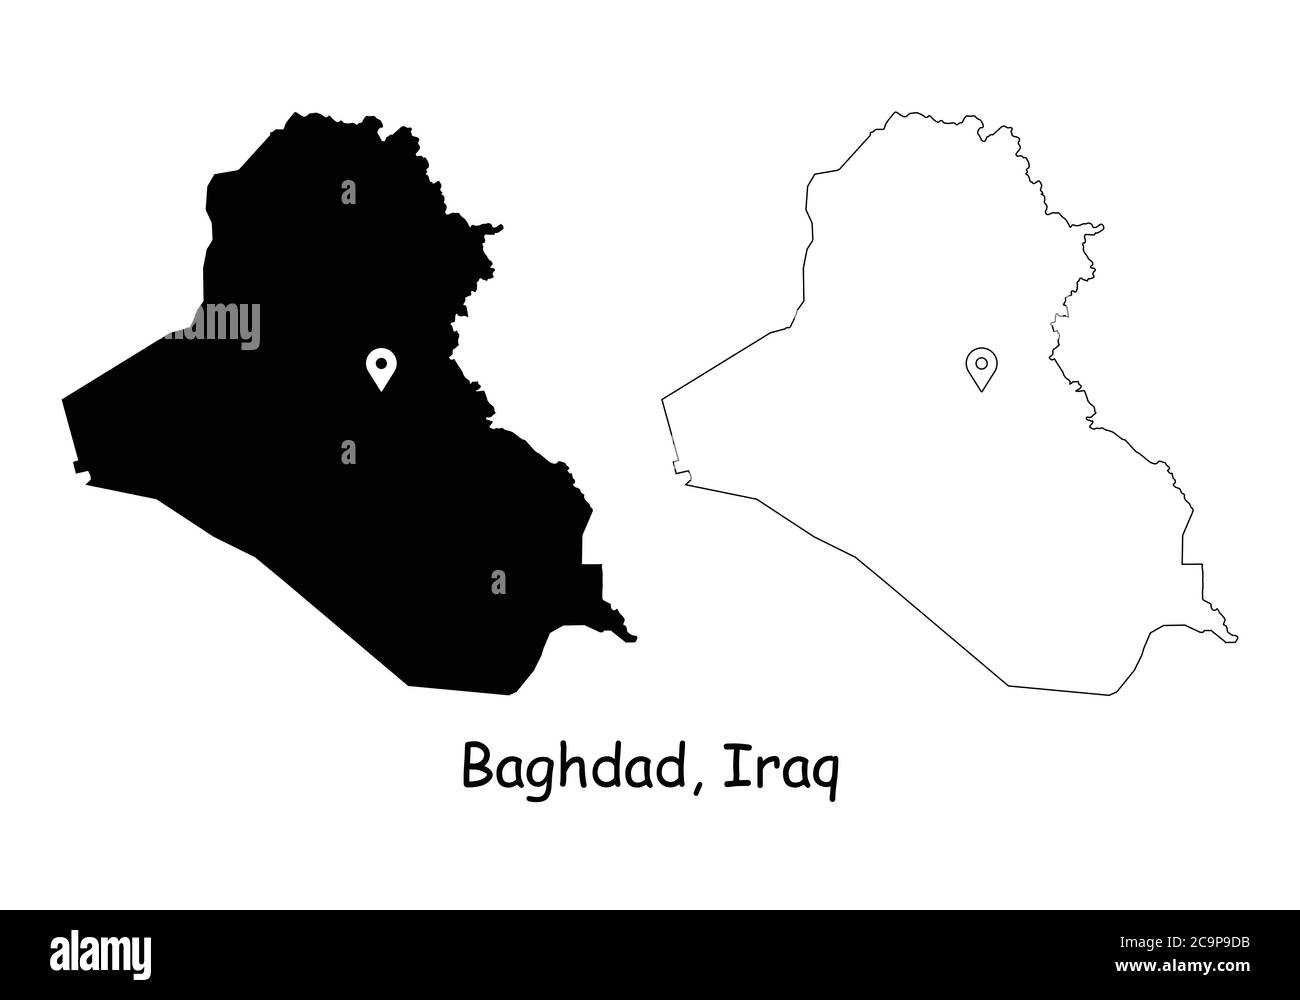 Baghdad Iraq. Detailed Country Map with Location Pin on Capital City. Black silhouette and outline maps isolated on white background. EPS Vector Stock Vector